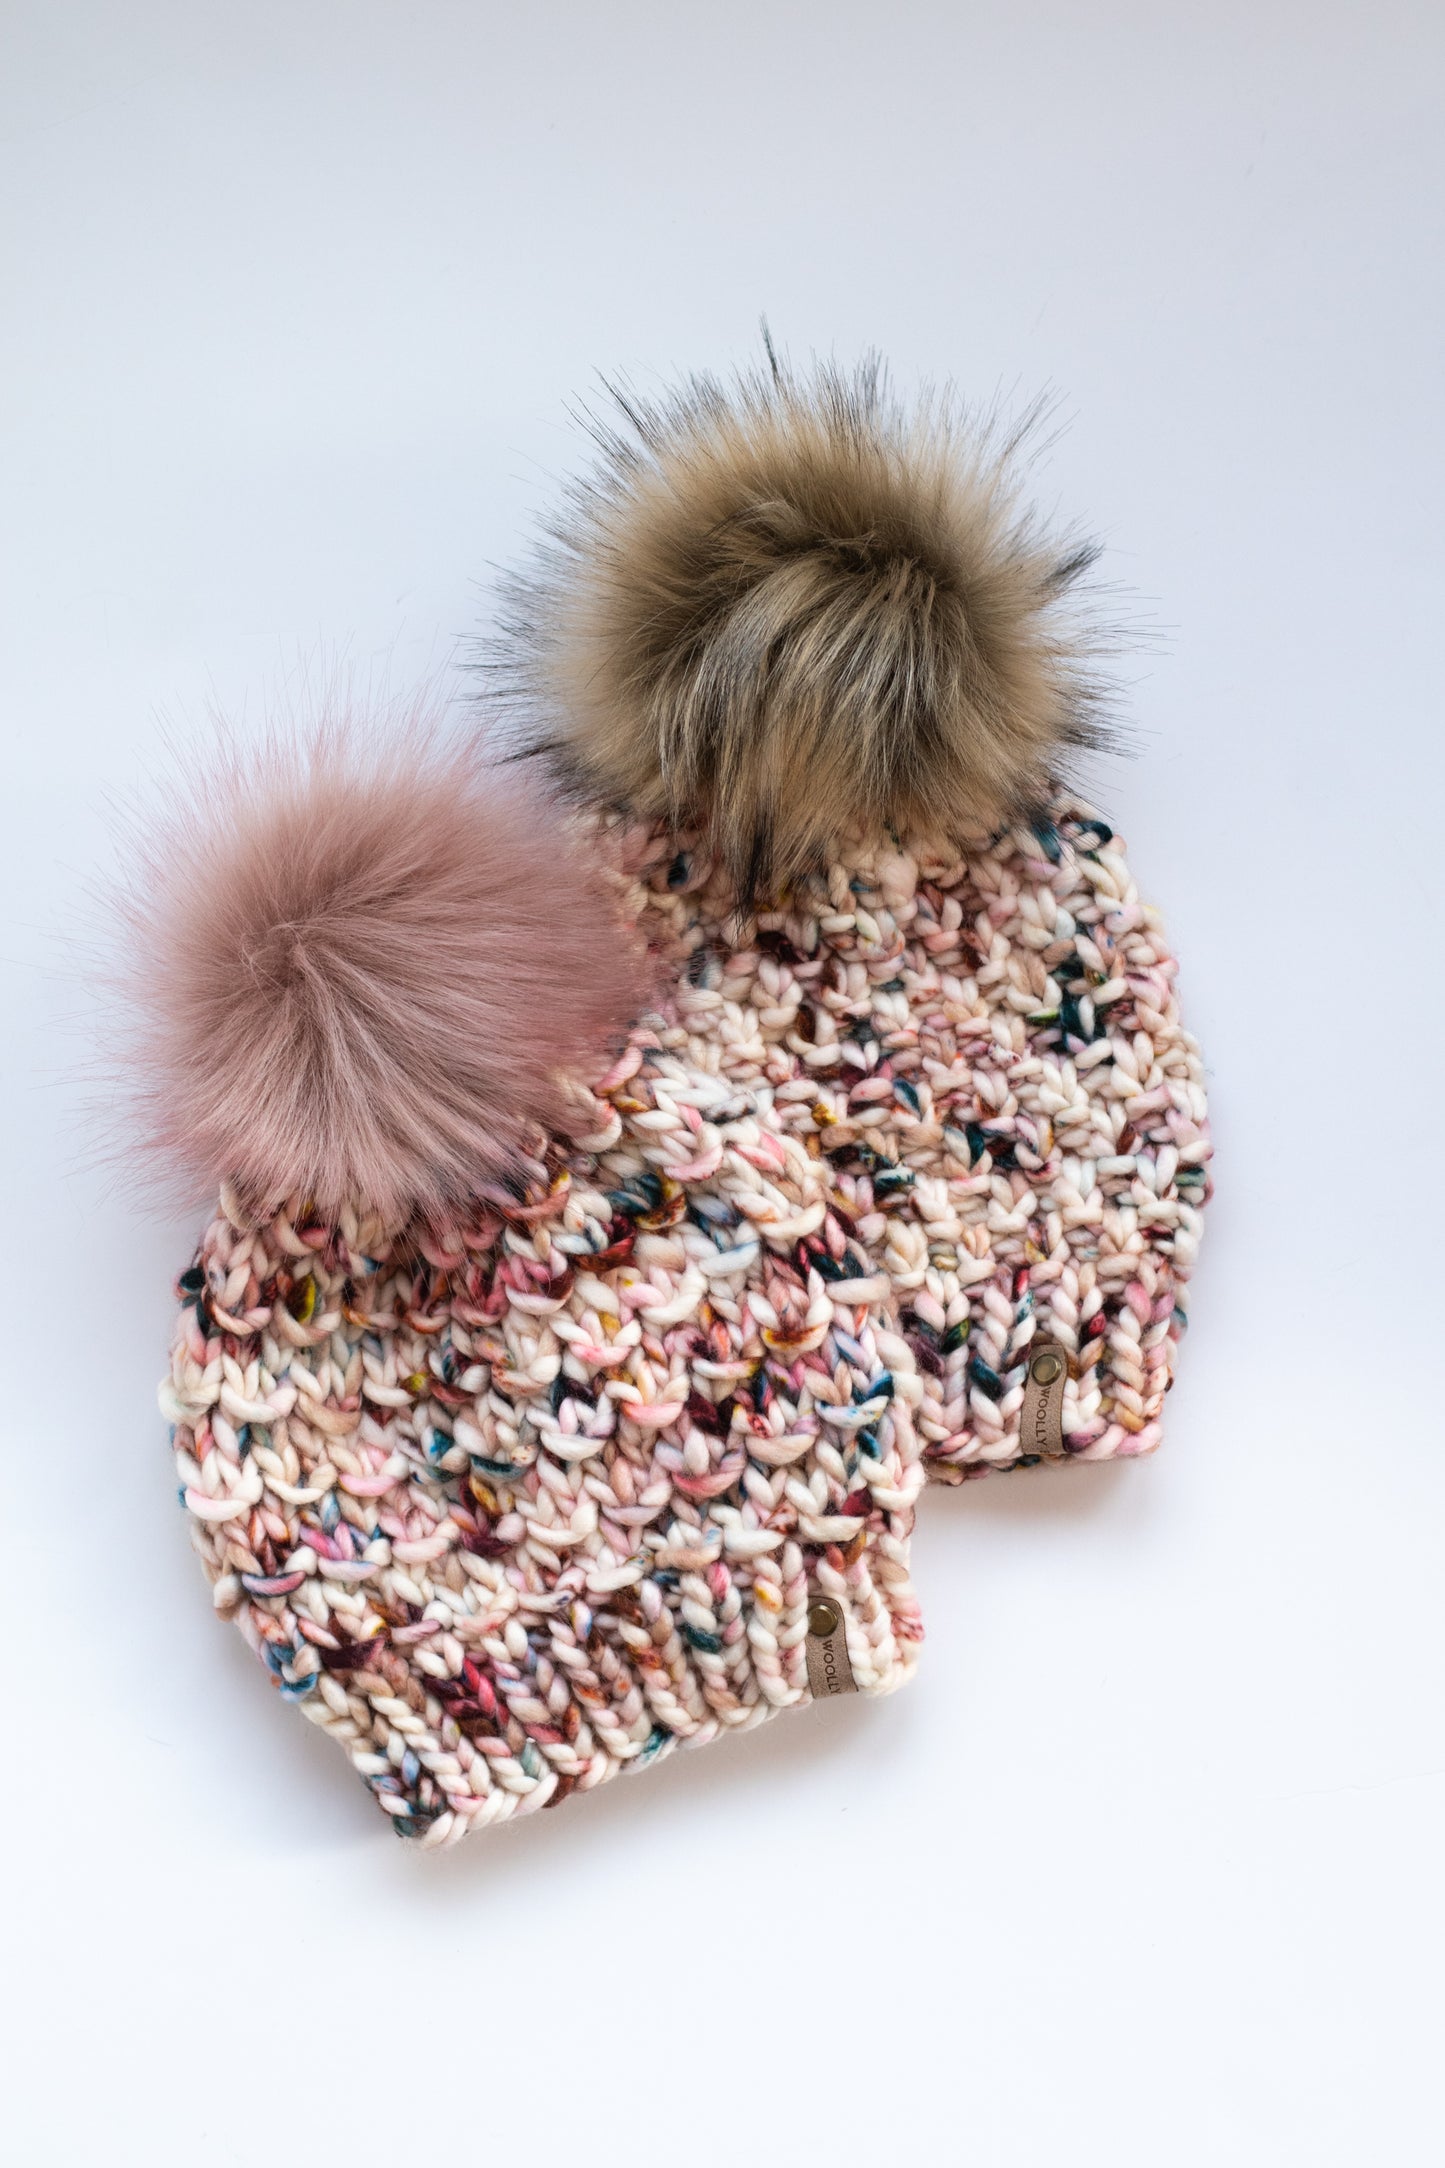 Cream and Pink Merino Wool Knit Hat with Faux Fur Pom Pom - Hand-Dyed Yarn